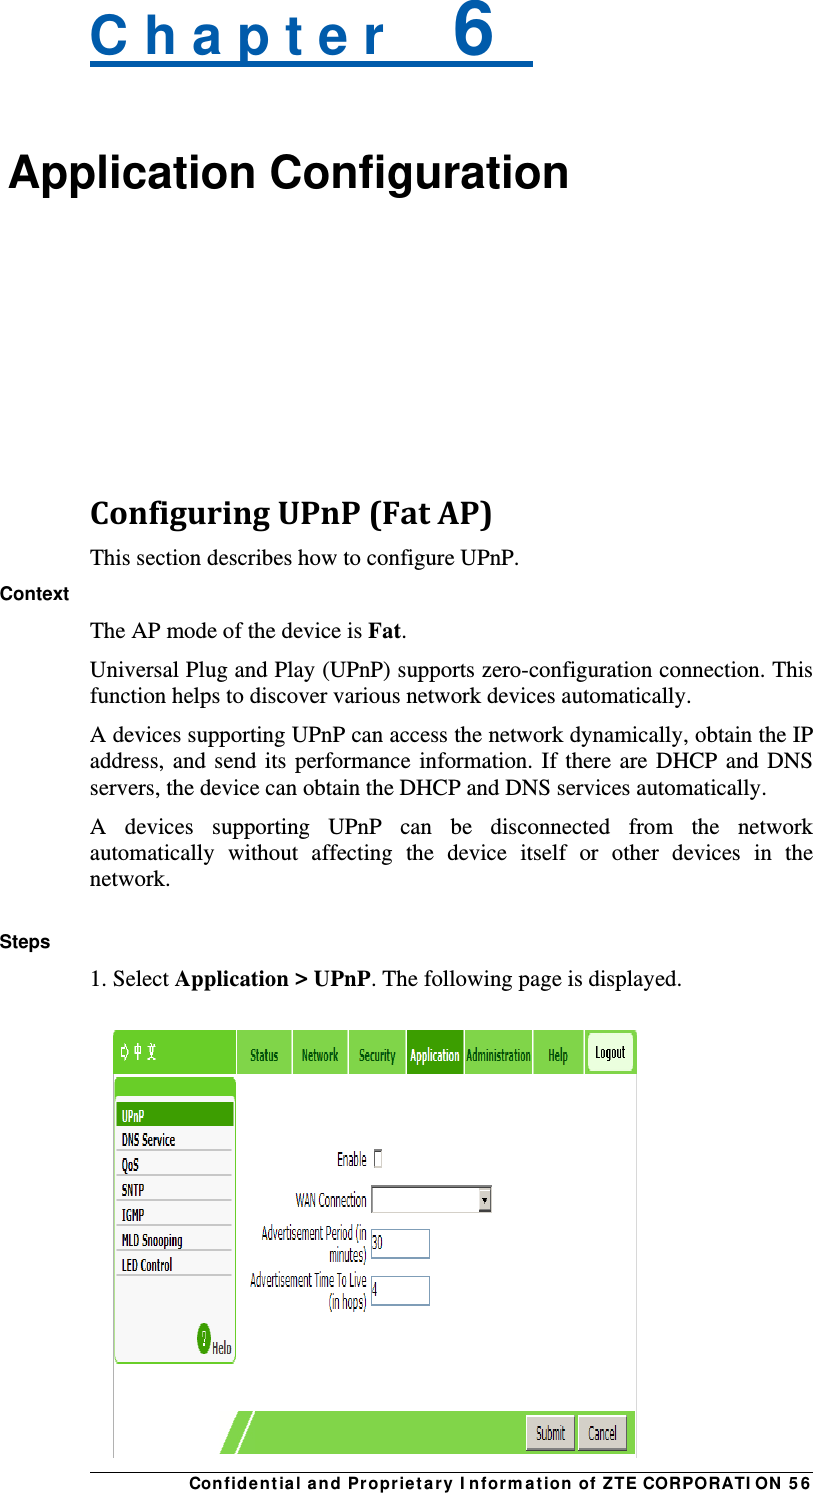 Con fidentia l and Propriet a ry I nform a t ion of ZTE CORPORATI ON  5 6 C h a p t e r    6   Application Configuration    ConfiguringUPnP(FatAP)This section describes how to configure UPnP. Context The AP mode of the device is Fat. Universal Plug and Play (UPnP) supports zero-configuration connection. This function helps to discover various network devices automatically. A devices supporting UPnP can access the network dynamically, obtain the IP address, and send its performance information. If there are DHCP and DNS servers, the device can obtain the DHCP and DNS services automatically. A devices supporting UPnP can be disconnected from the network automatically without affecting the device itself or other devices in the network.  Steps 1. Select Application &gt; UPnP. The following page is displayed.  